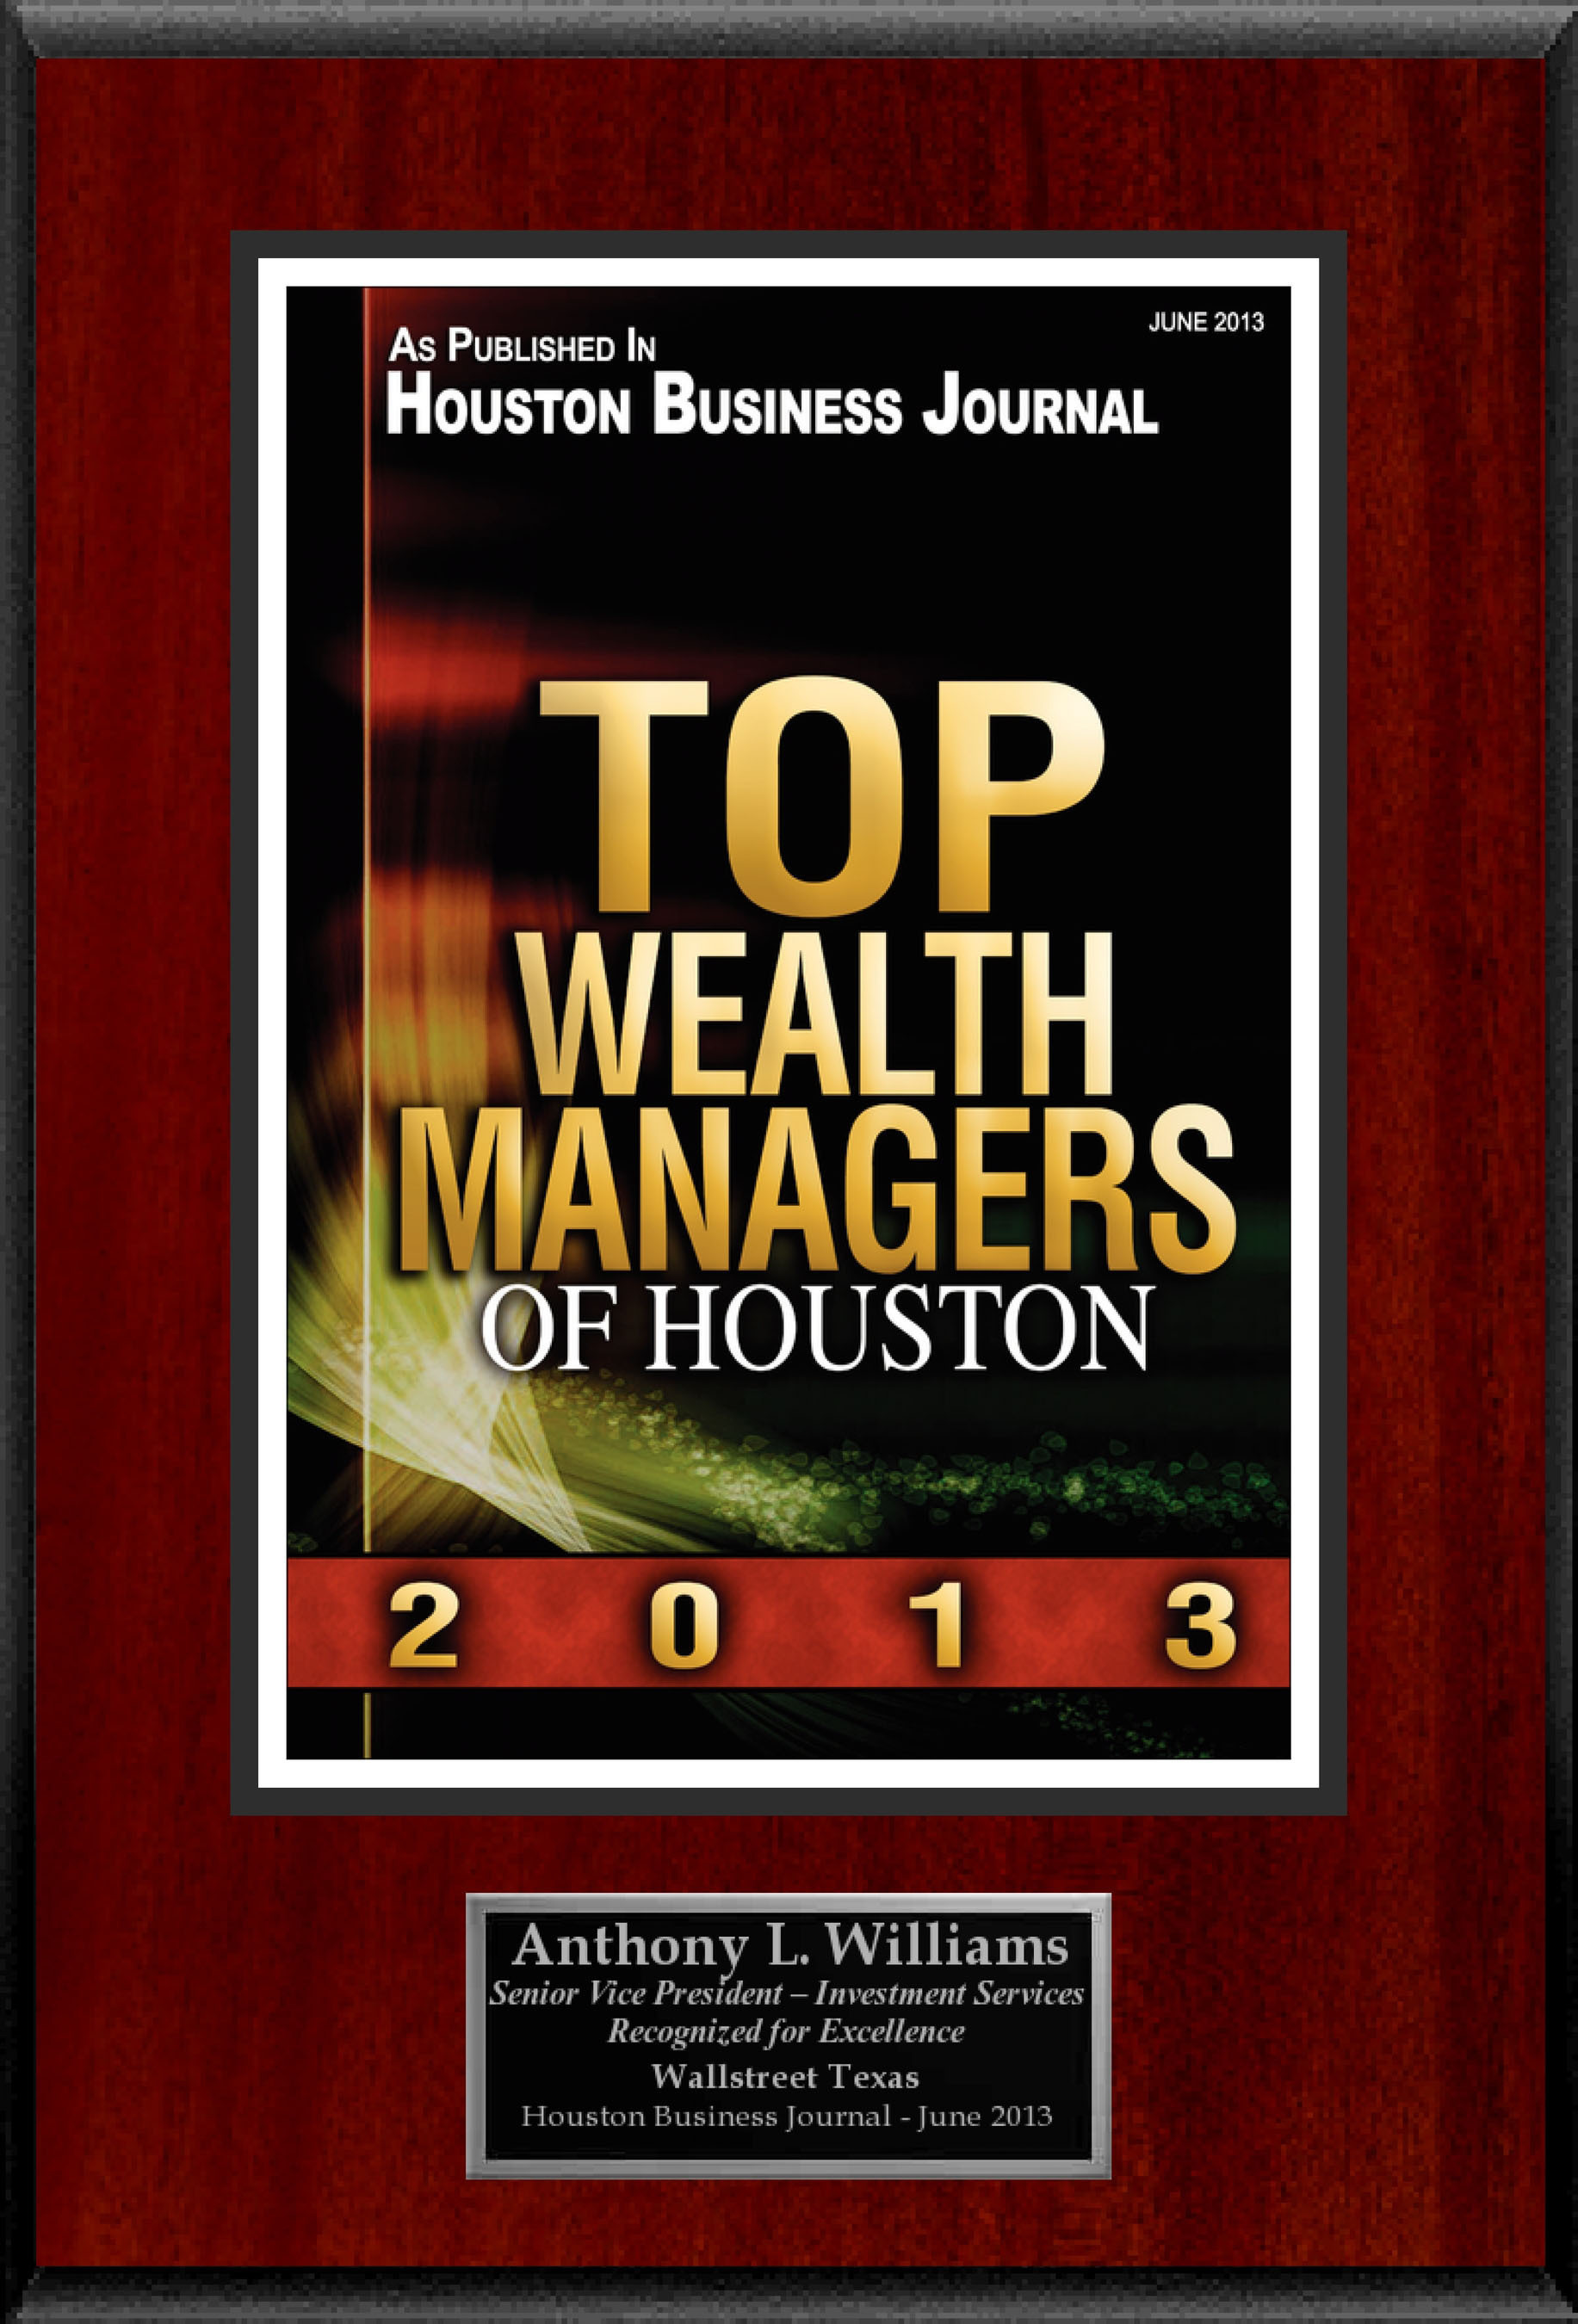 Anthony L. Williams Selected For "Top Wealth Managers of Houston". (PRNewsFoto/American Registry) (PRNewsFoto/AMERICAN REGISTRY)